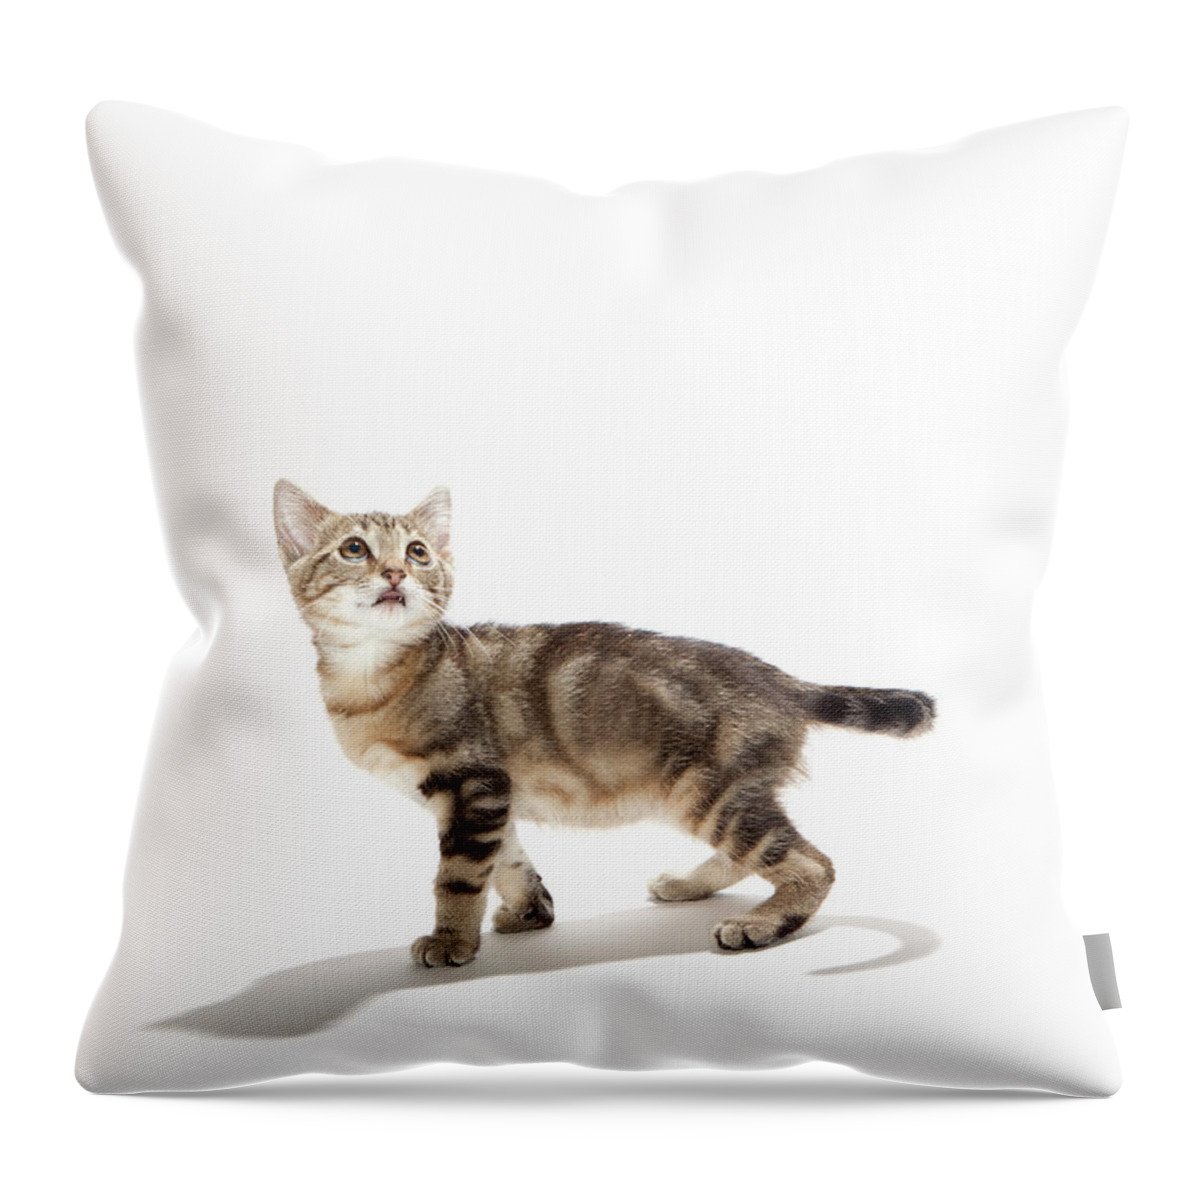 Pets Throw Pillow featuring the photograph Kitten On White Background by Hollenderx2